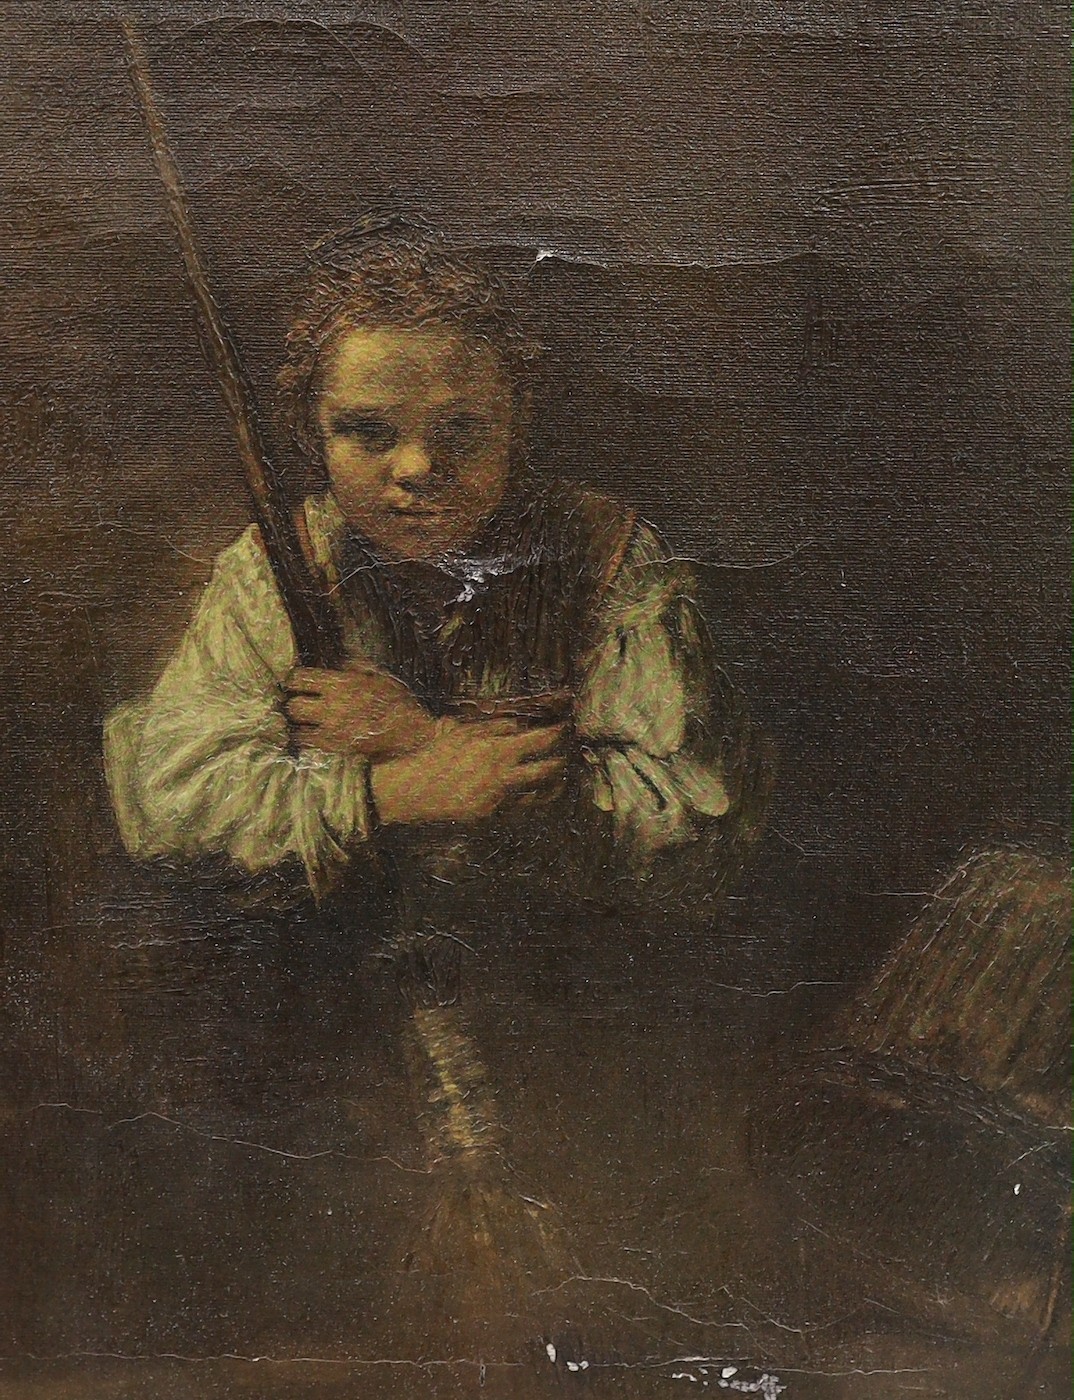 19th century English School, oil on canvas, Study of a boy angler, 24 x 19cm and an oleograph after Rembrandt